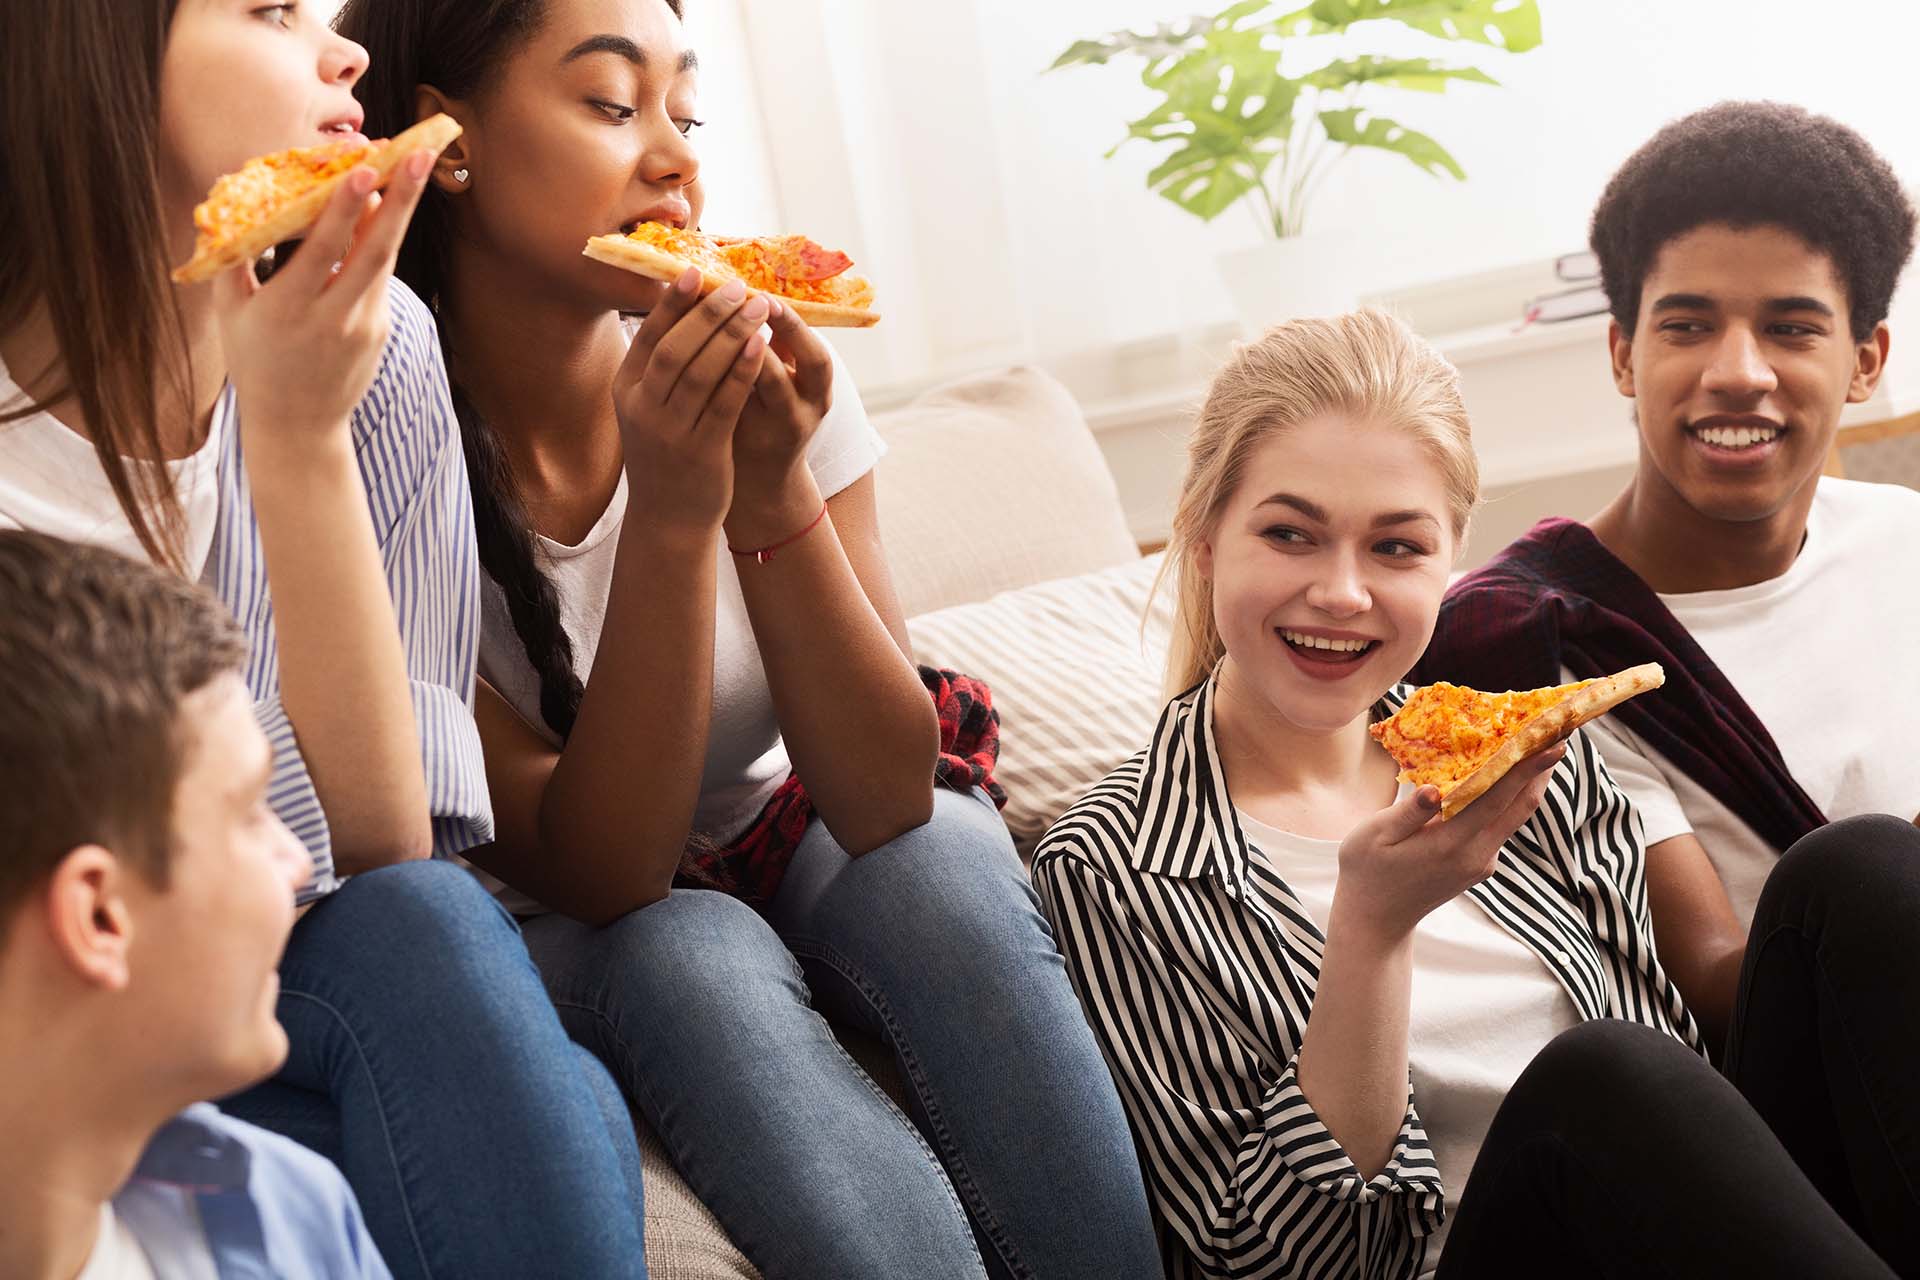 A group of teenage kids visiting and eating pizza after taking out their aligners